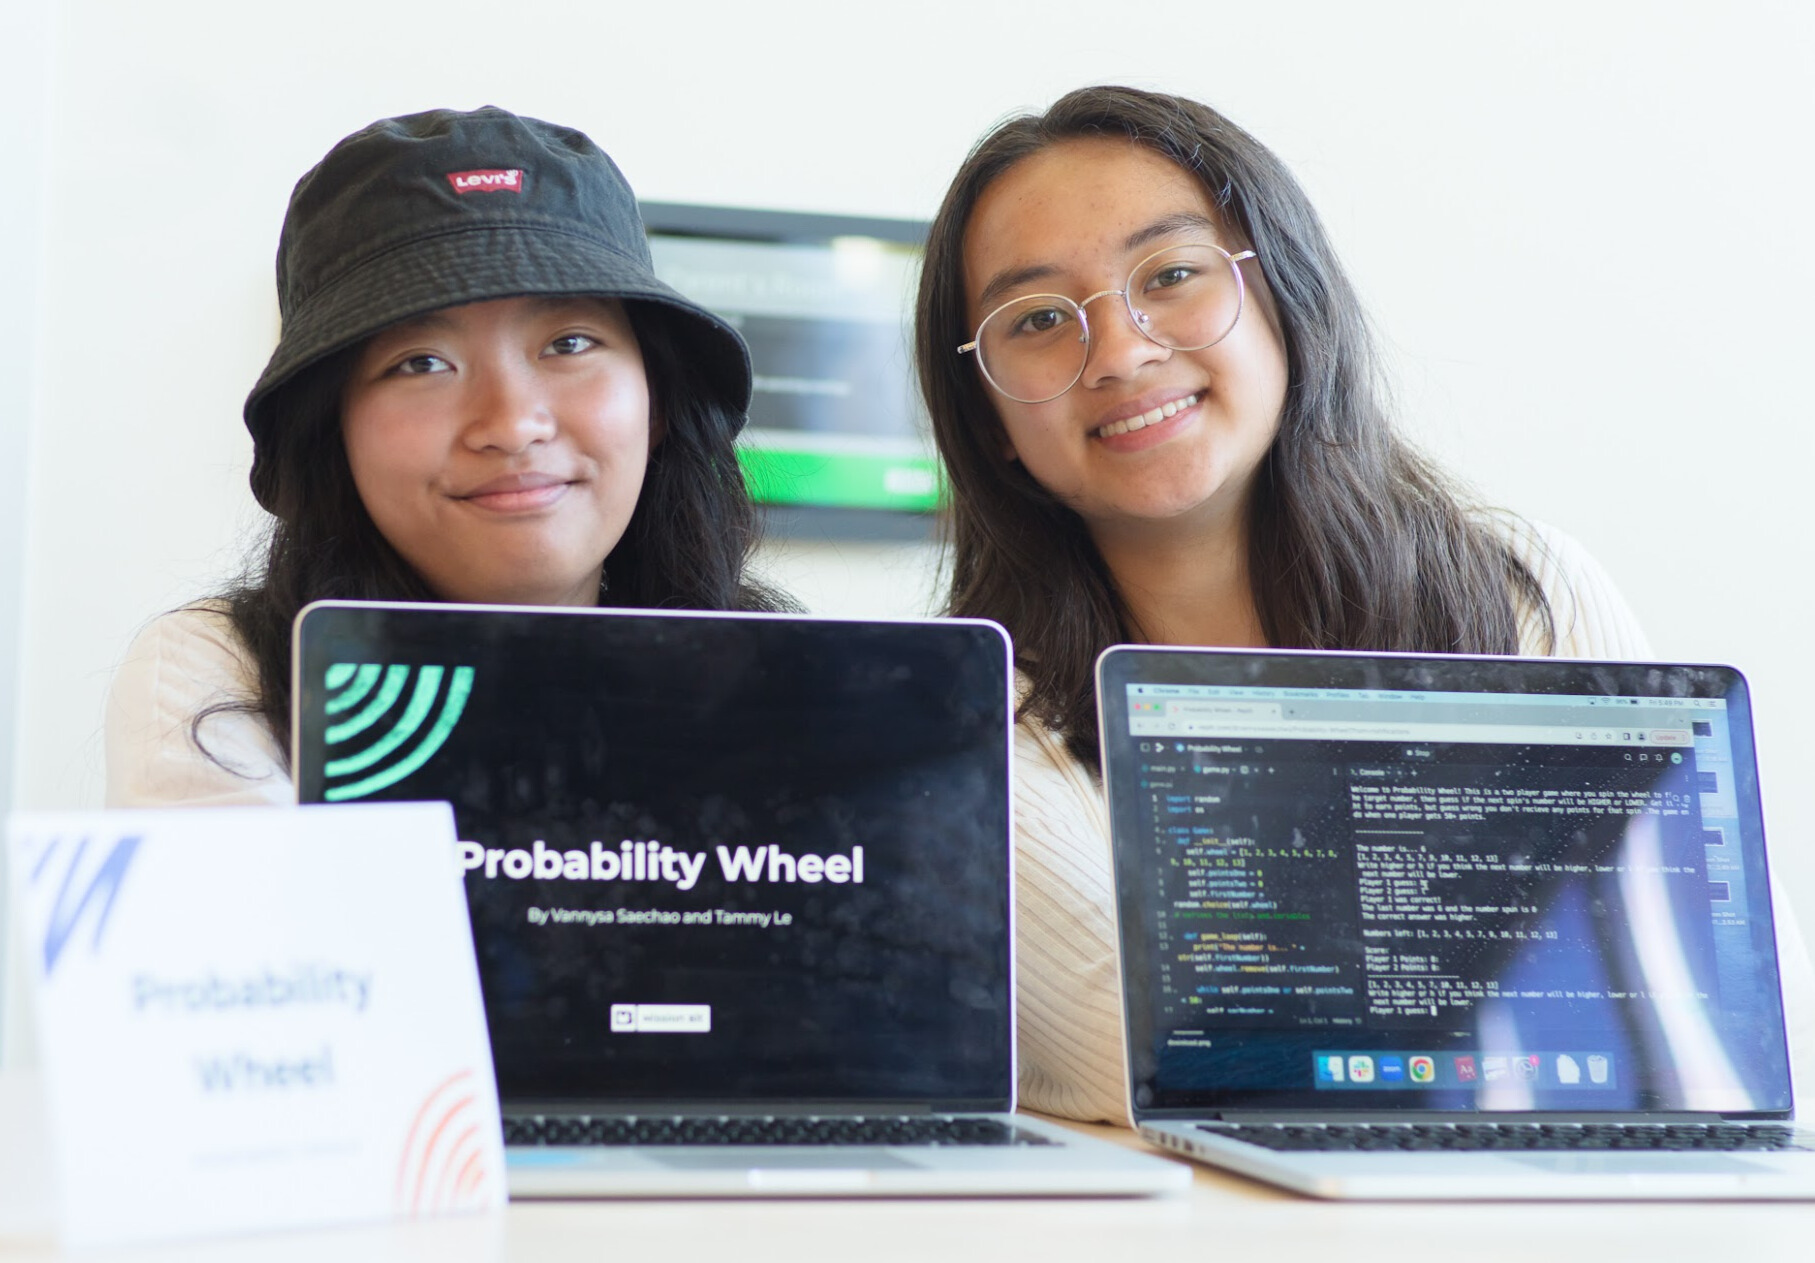 Two students sit at a desk. Their coding project is displayed on laptops in front of them